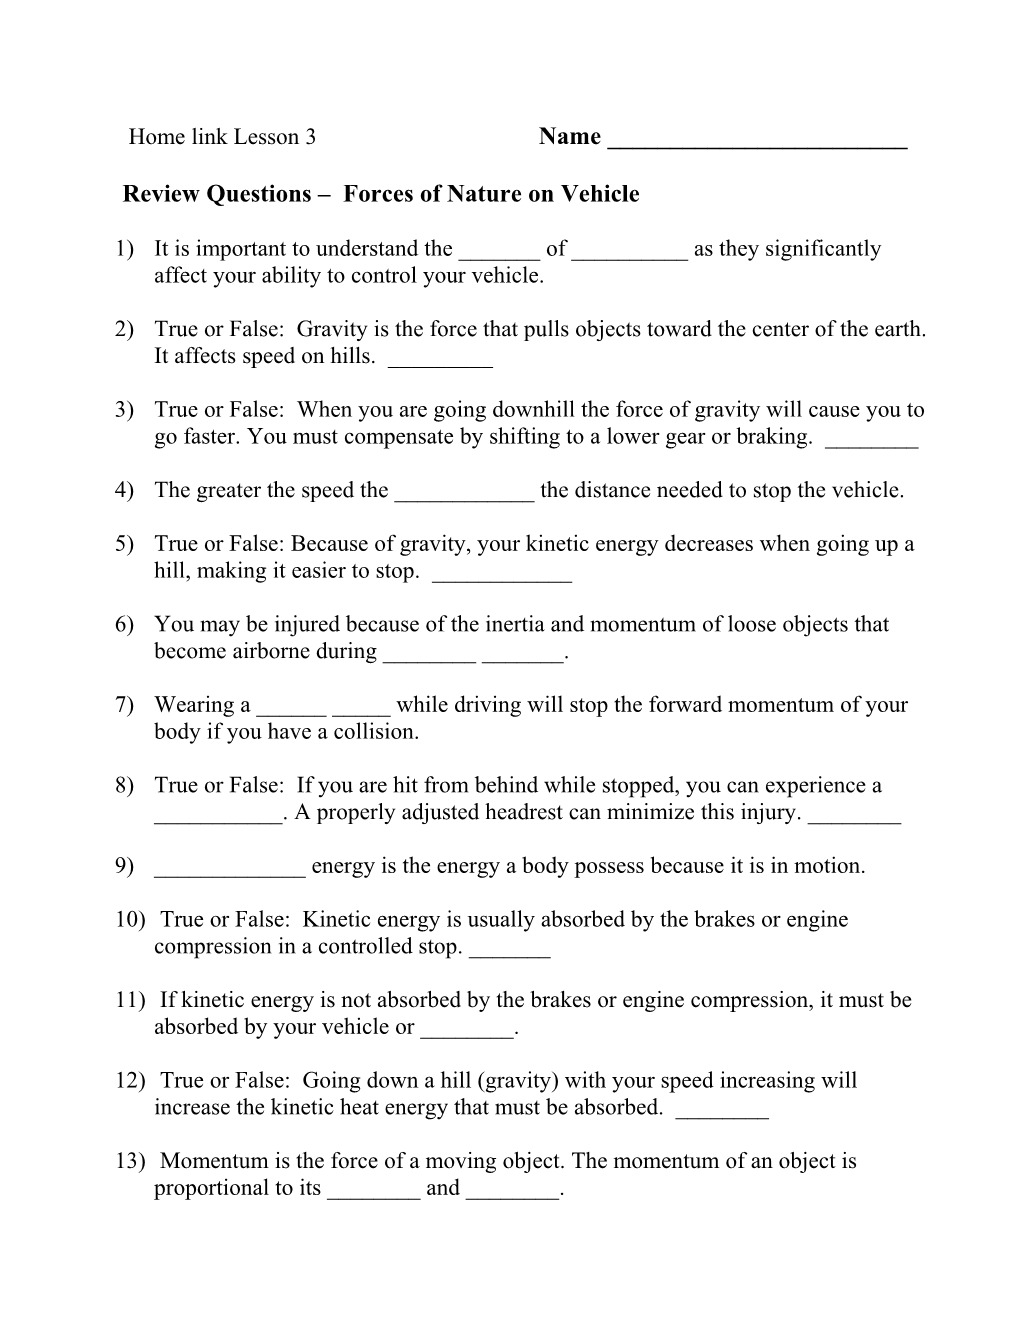 Review Questions Natural Forces and Driving